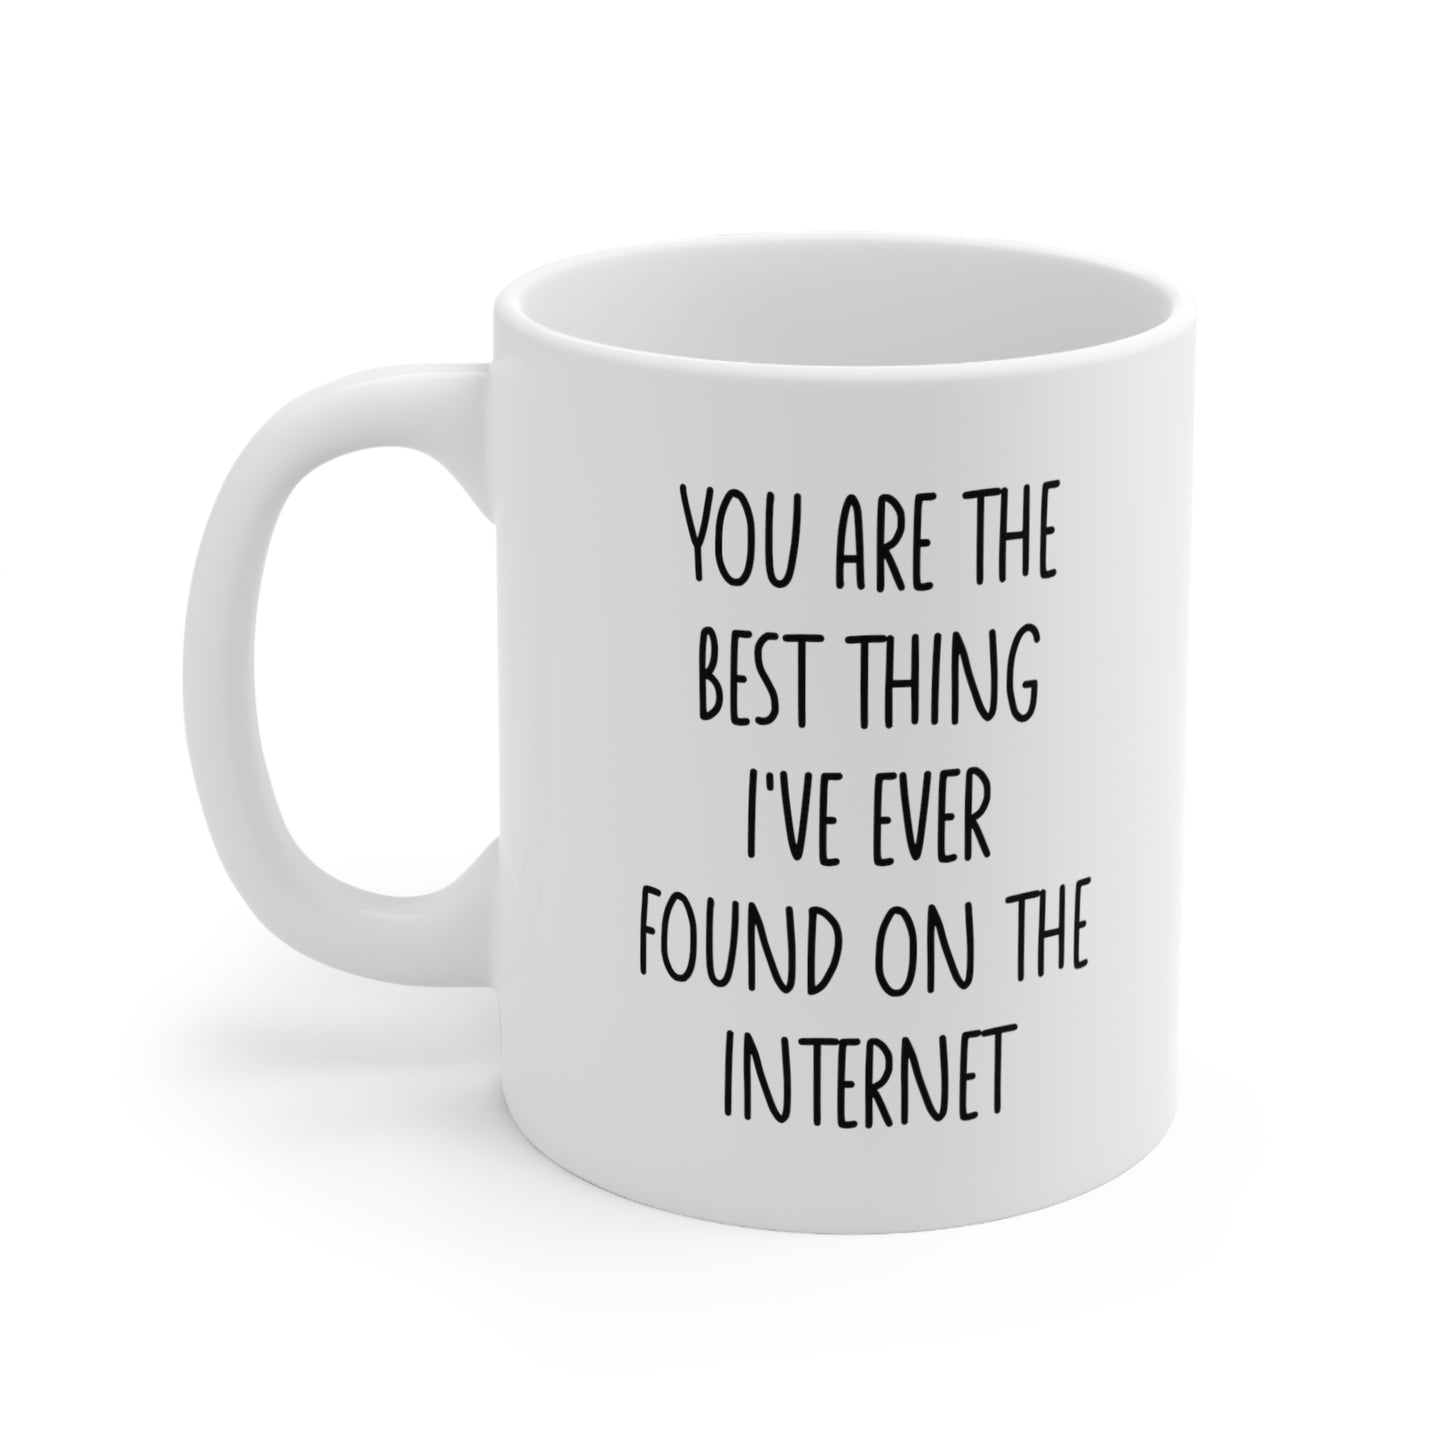 You Are the Best Thing I've Ever Found on the Internet Coffee Mug